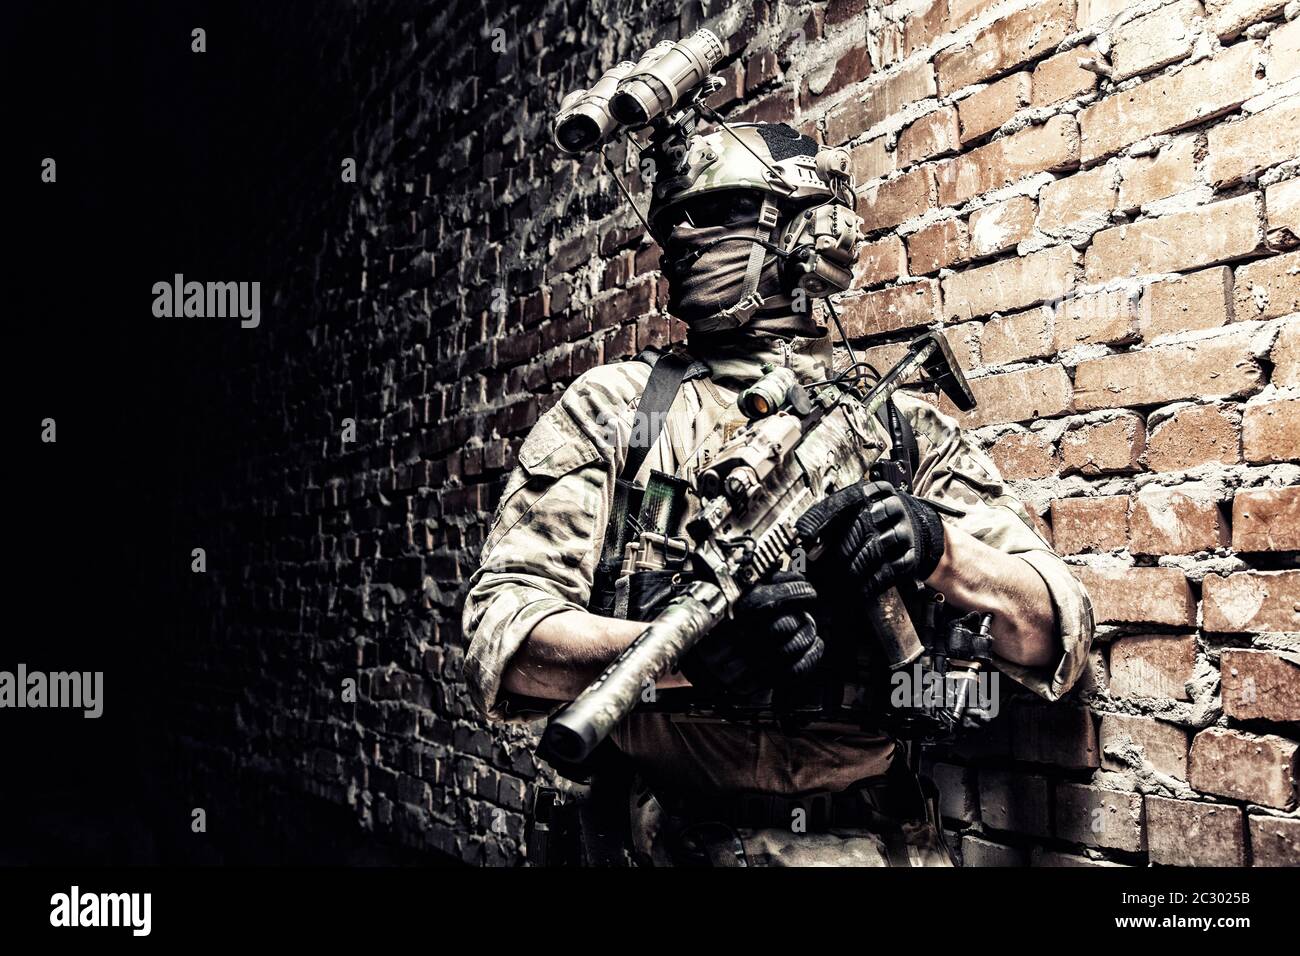 Special operations forces soldier, counter terrorism assault team fighter with night vision device on helmet and service rifle, low key indoor shot br Stock Photo